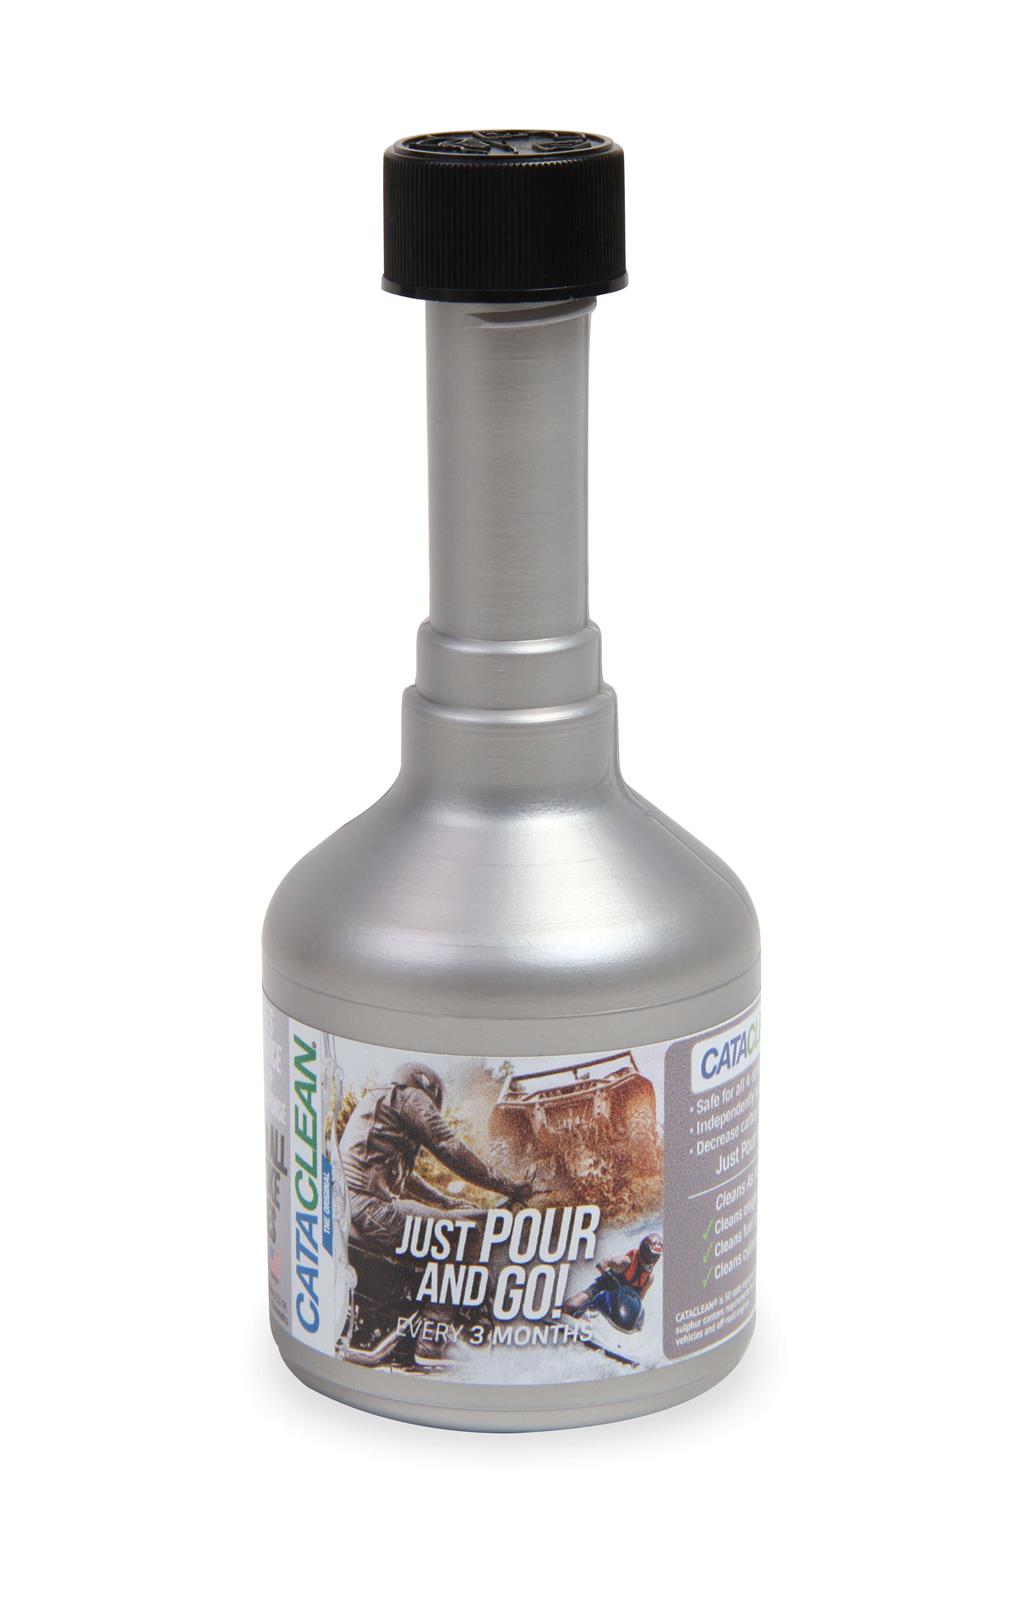 Cataclean Powersports Fuel System Cleaner 120008CAT-6